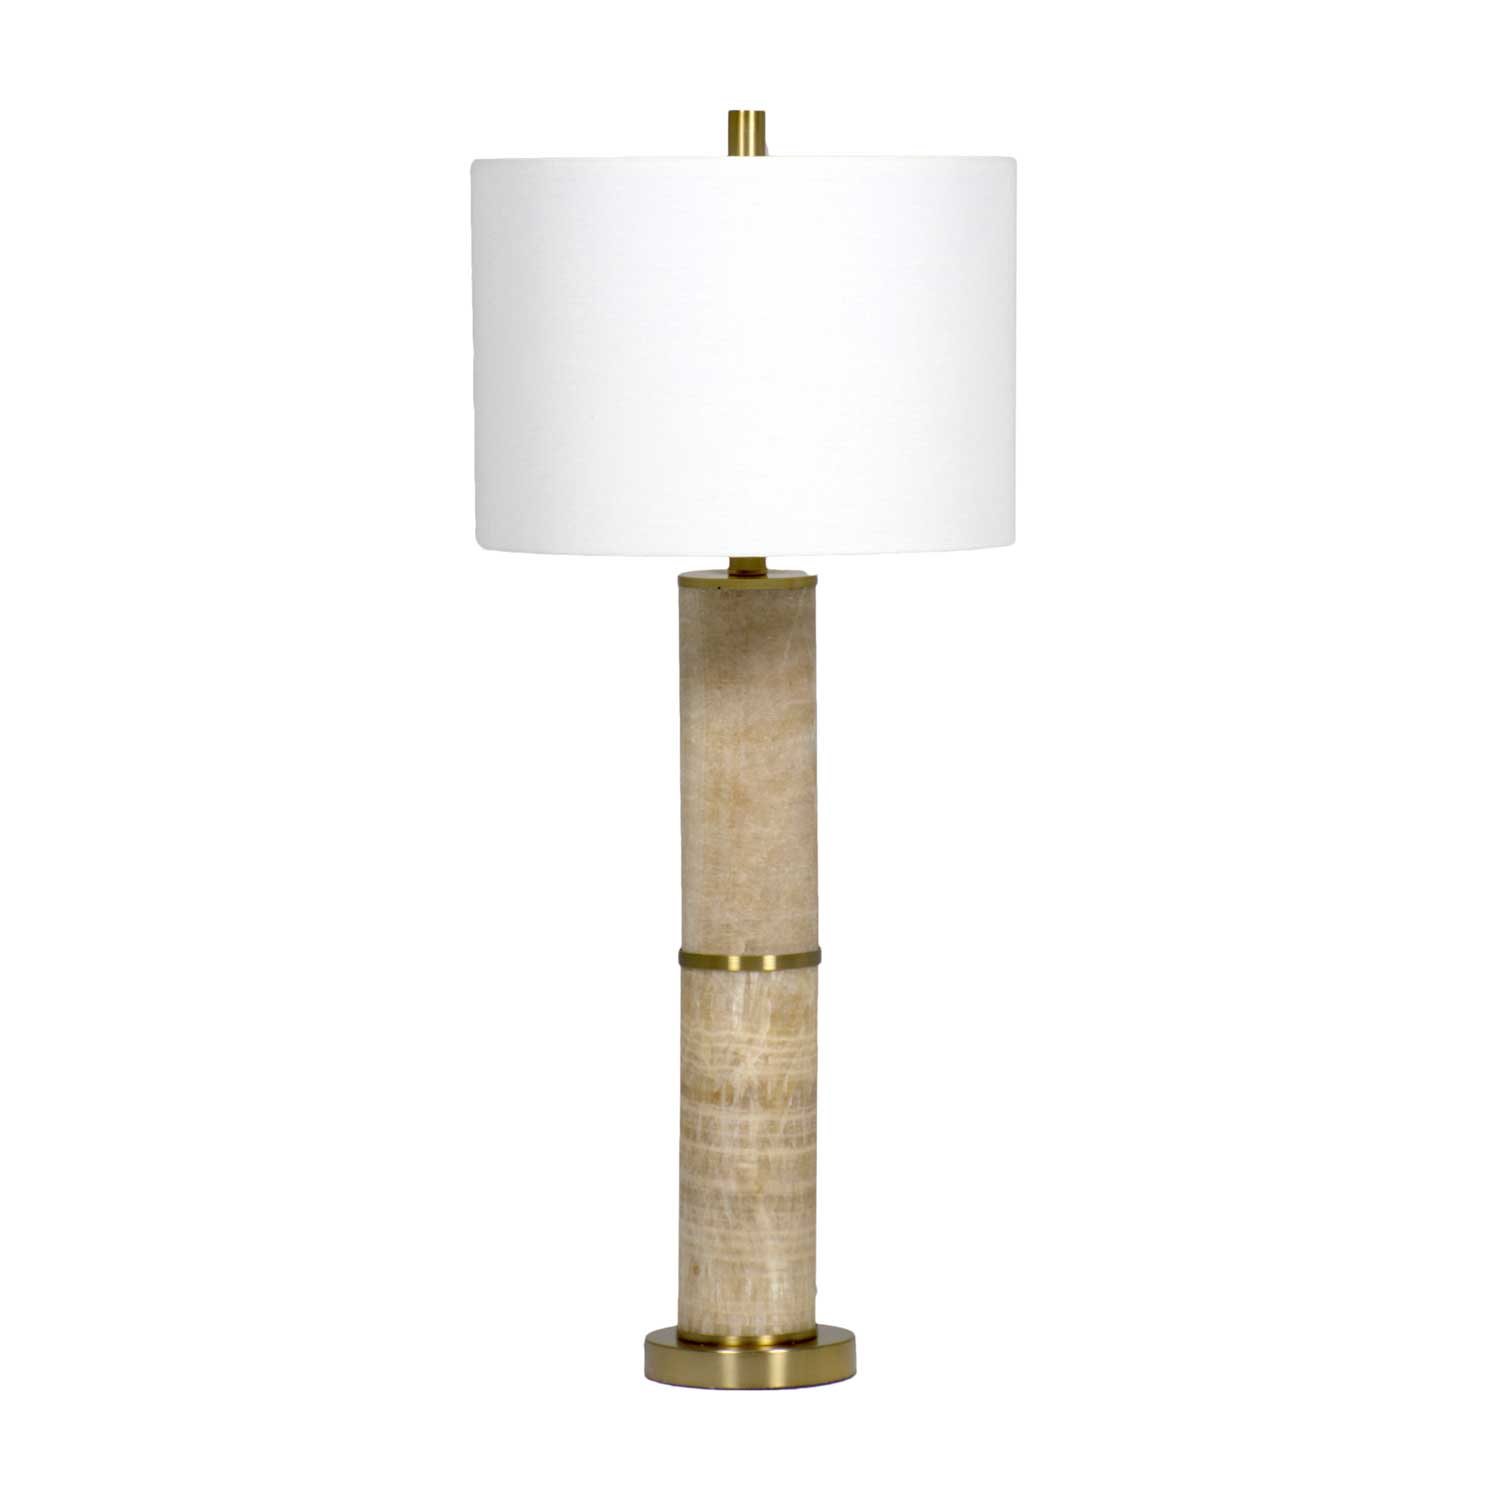 soloman table lamp – white product image